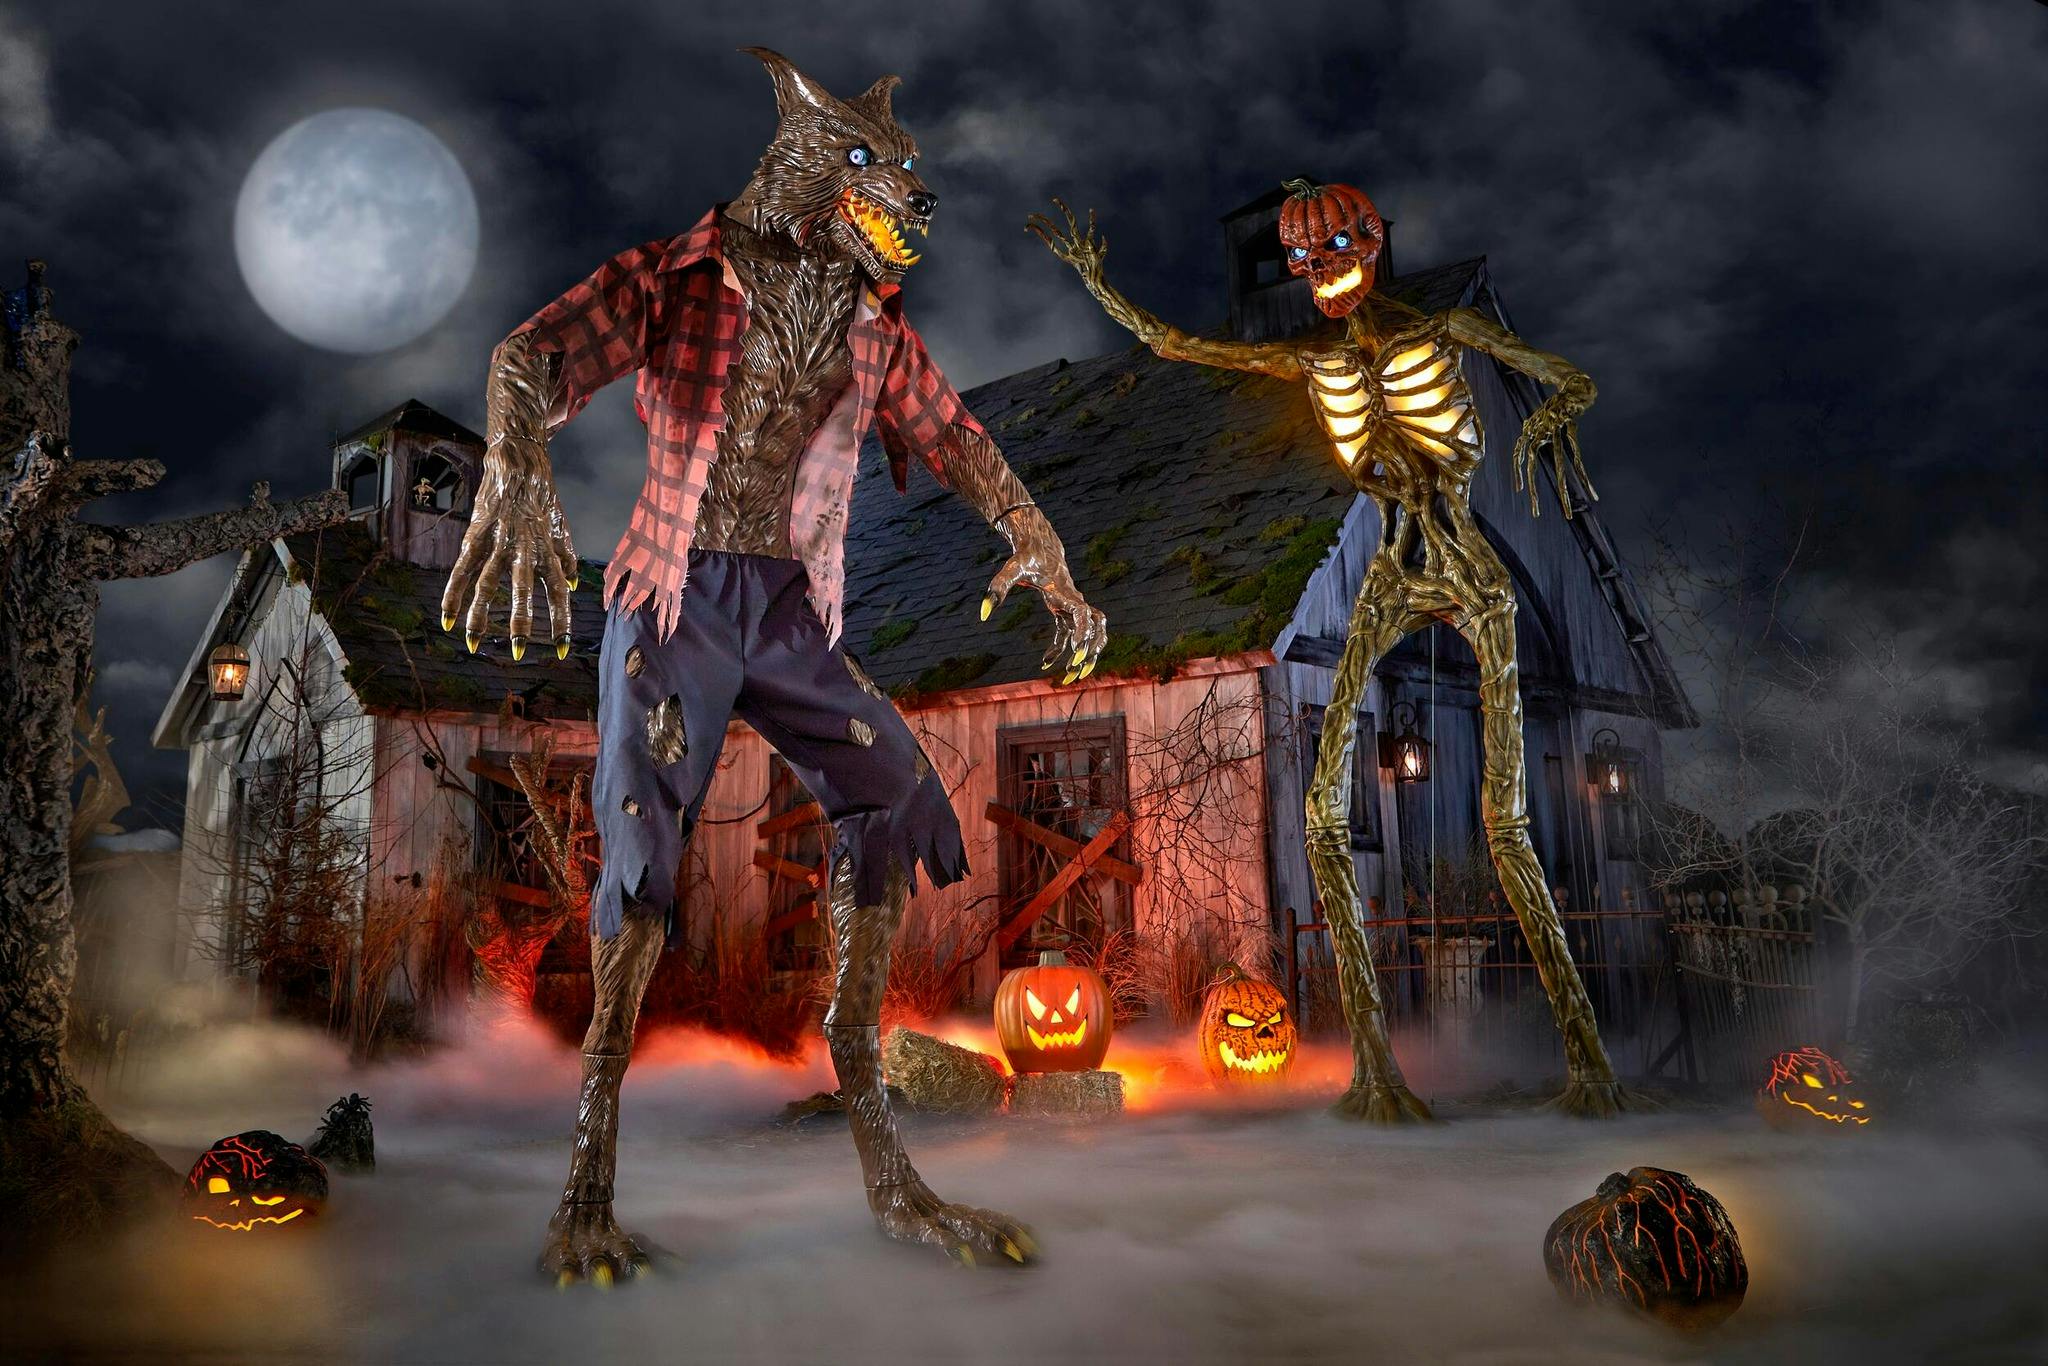 The giant inferno skeleton and immortal werewolf from Home Depot on a spooky Halloween set